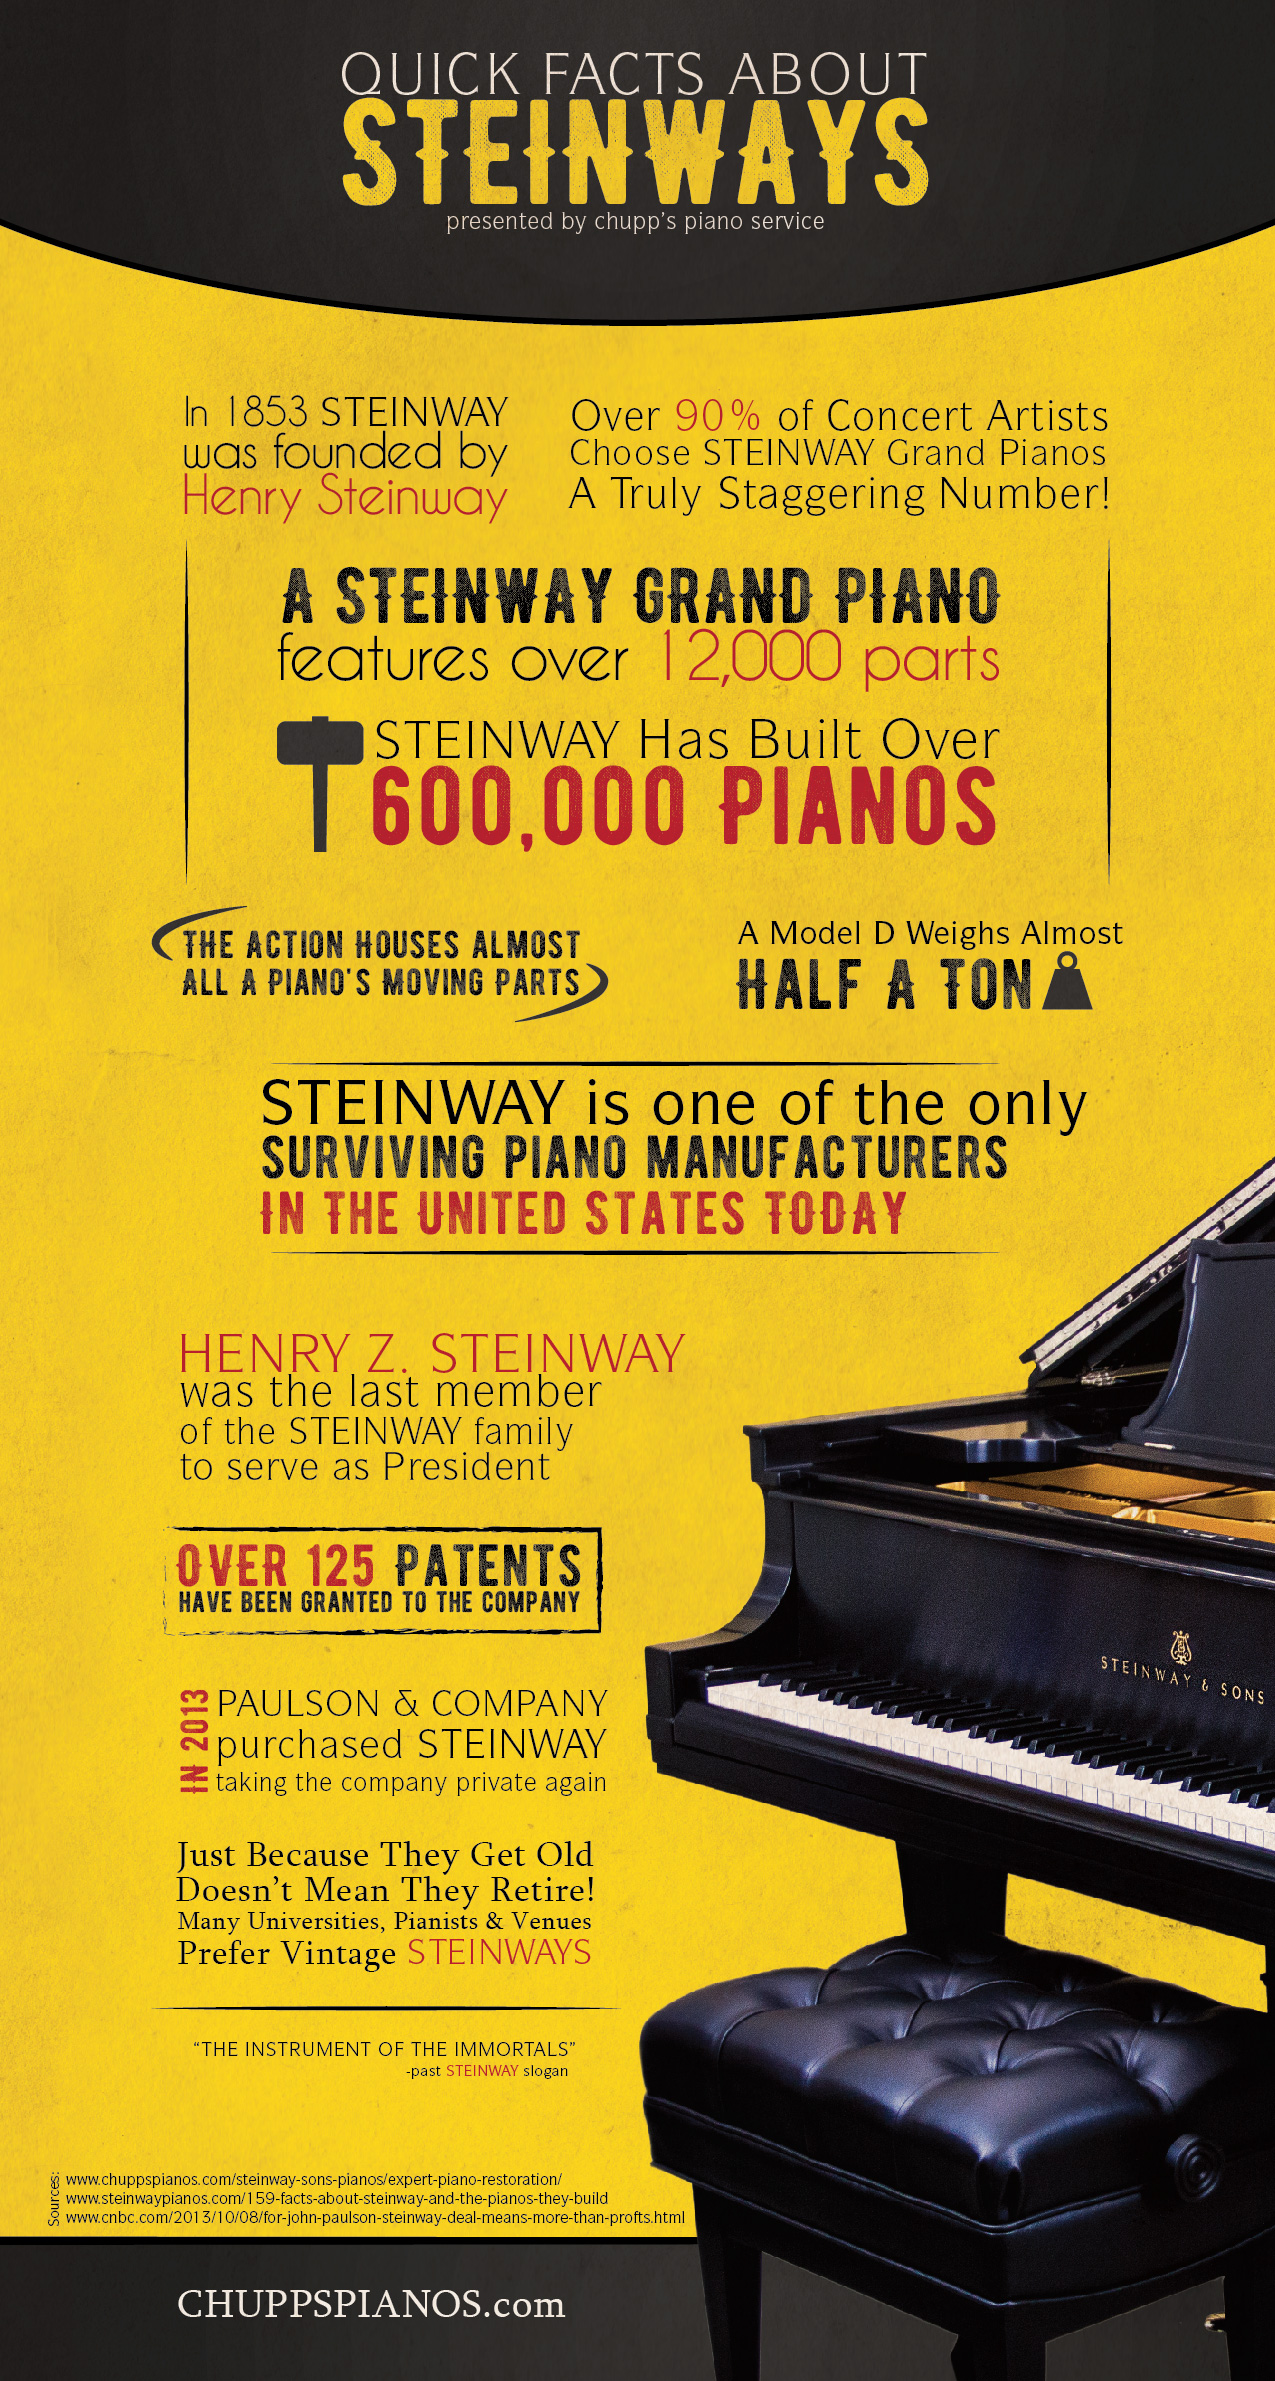 Quick Facts About Steinway Pianos - Infographic - Vector Design